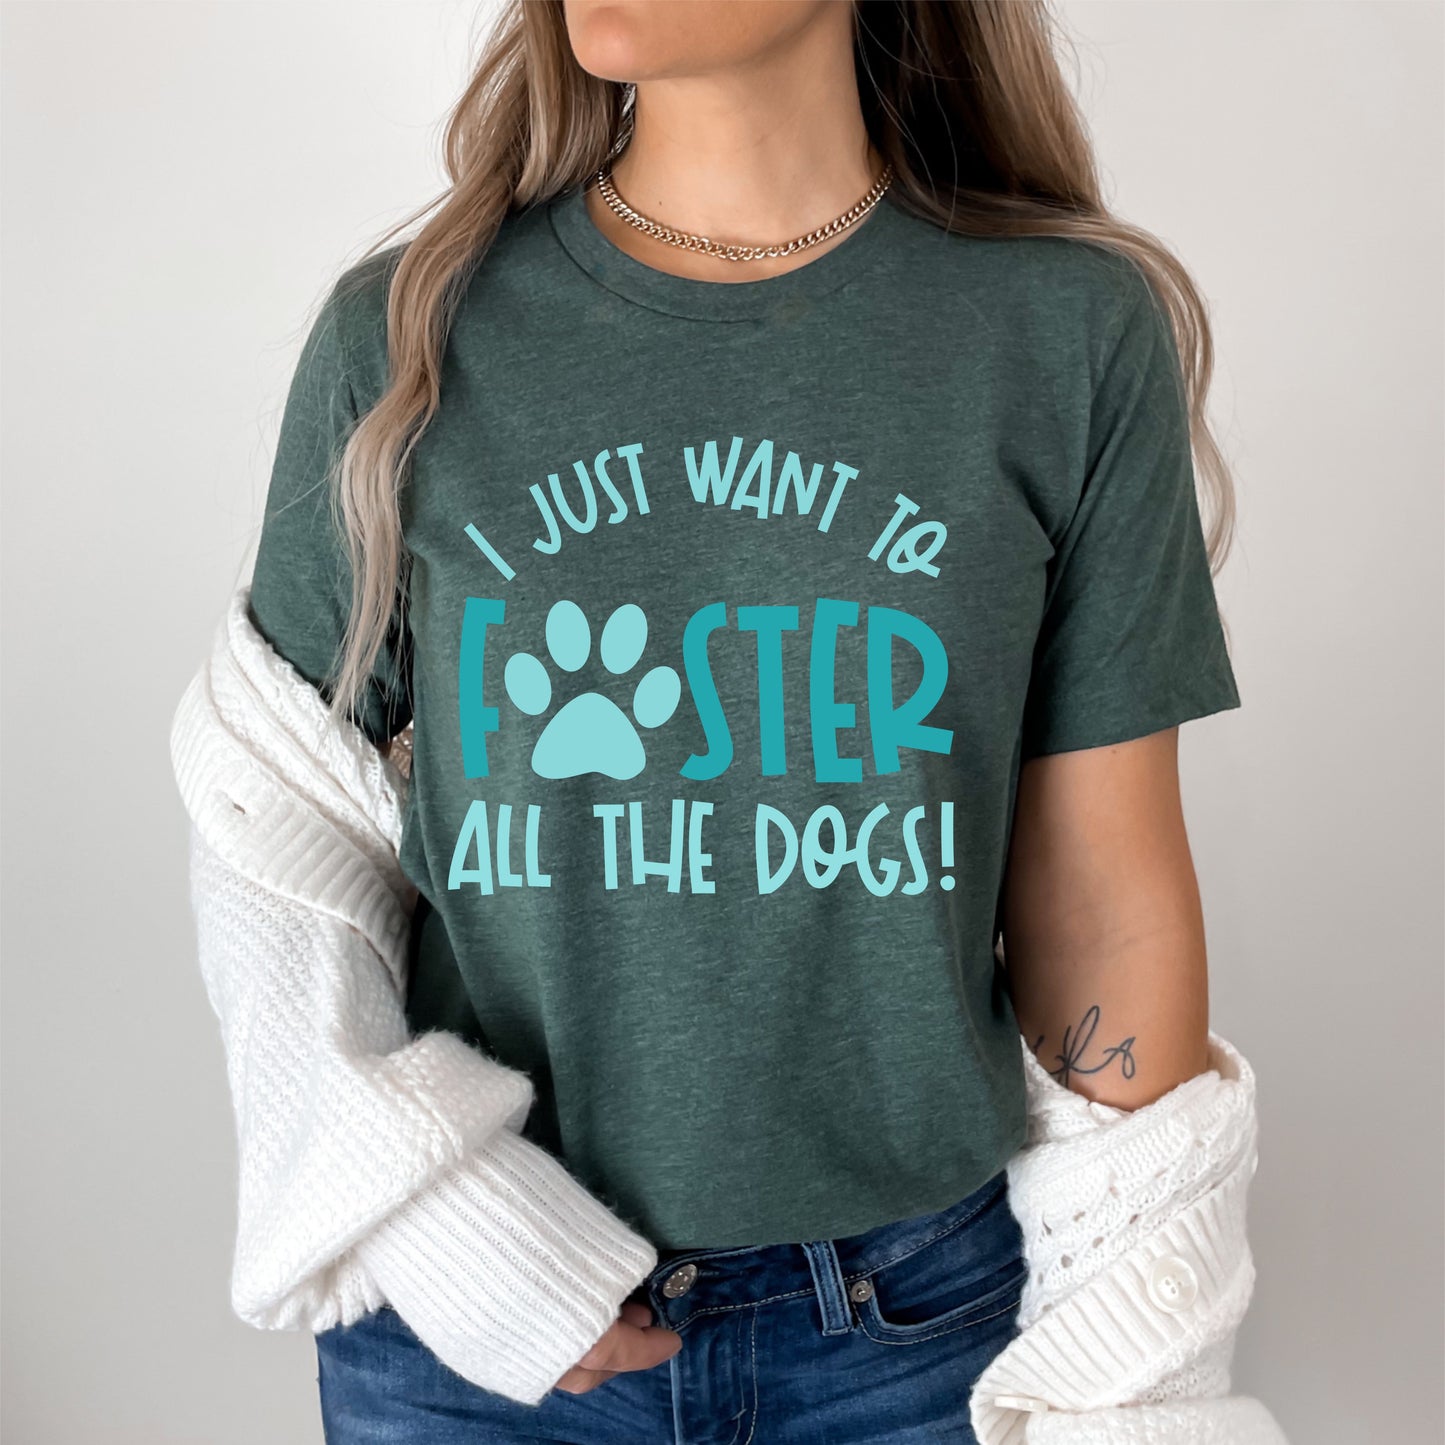 Just want to foster all the dogs Tee